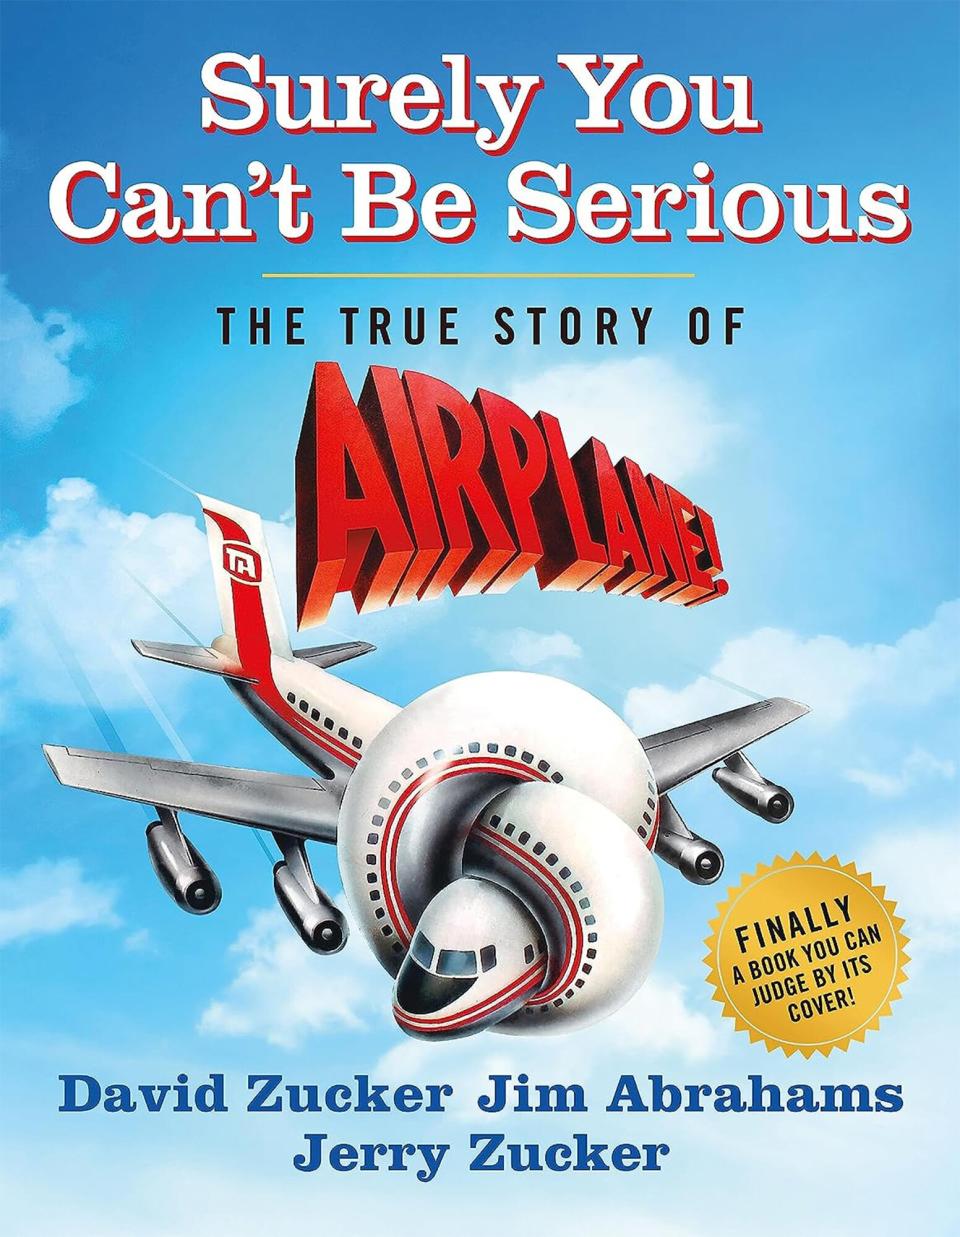 Surely You Can't Be Serious: The True Story of Airplane! Hardcover